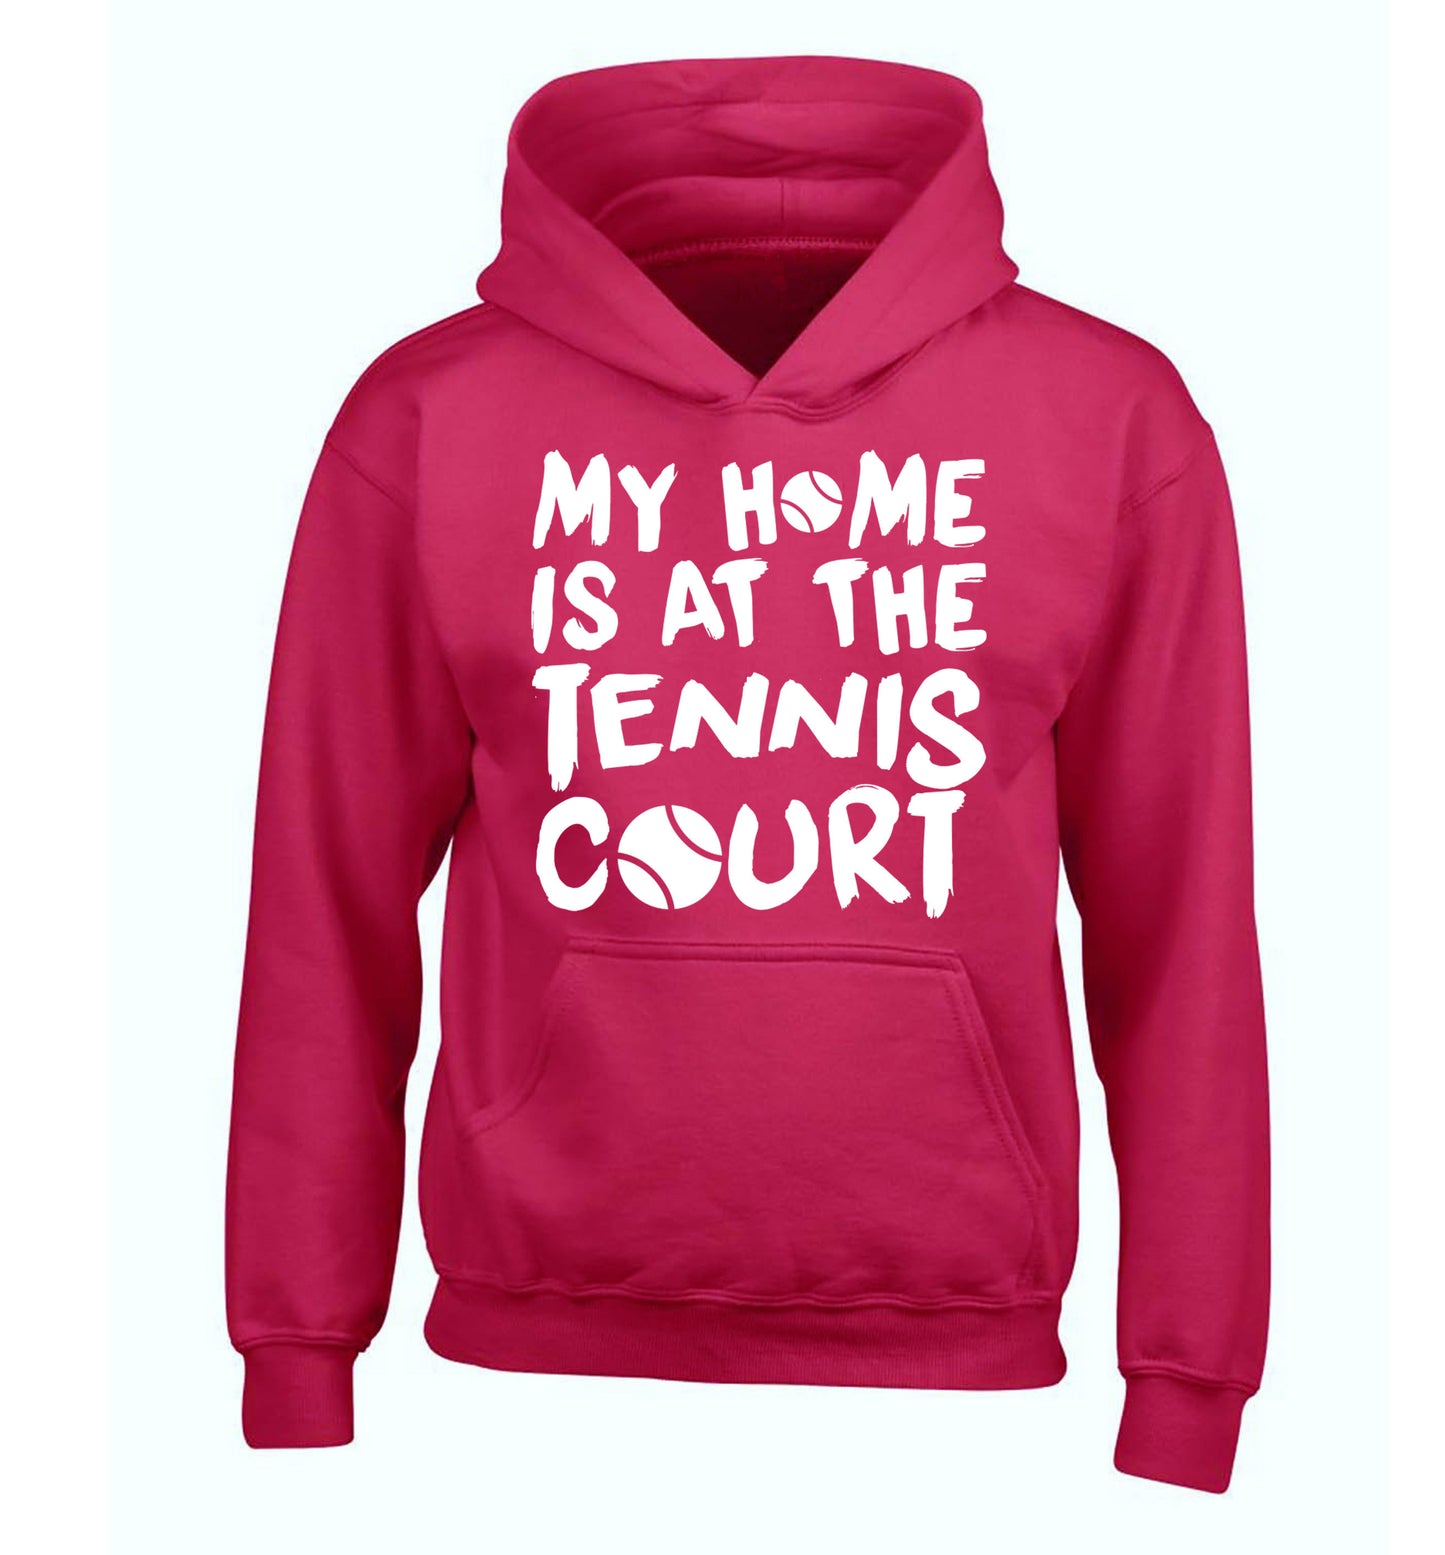 My home is at the tennis court children's pink hoodie 12-14 Years